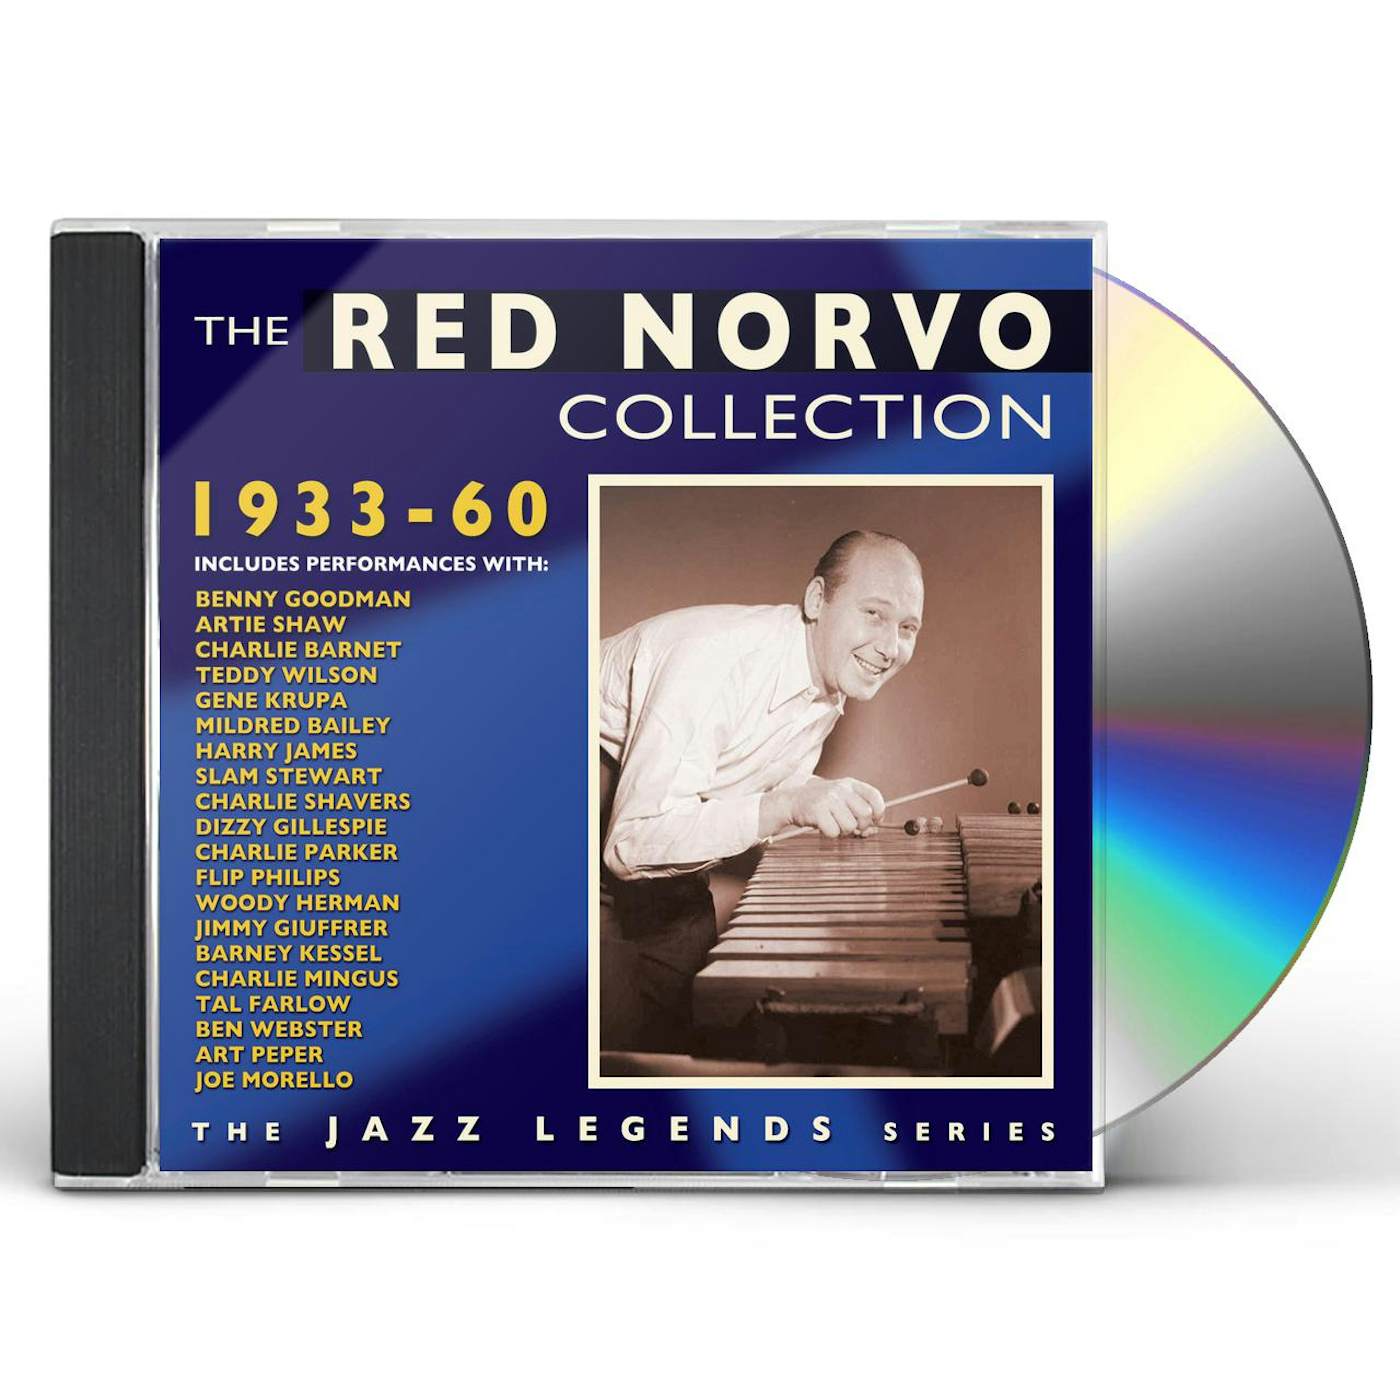 Red Norvo Collection: 1933-1960 CD